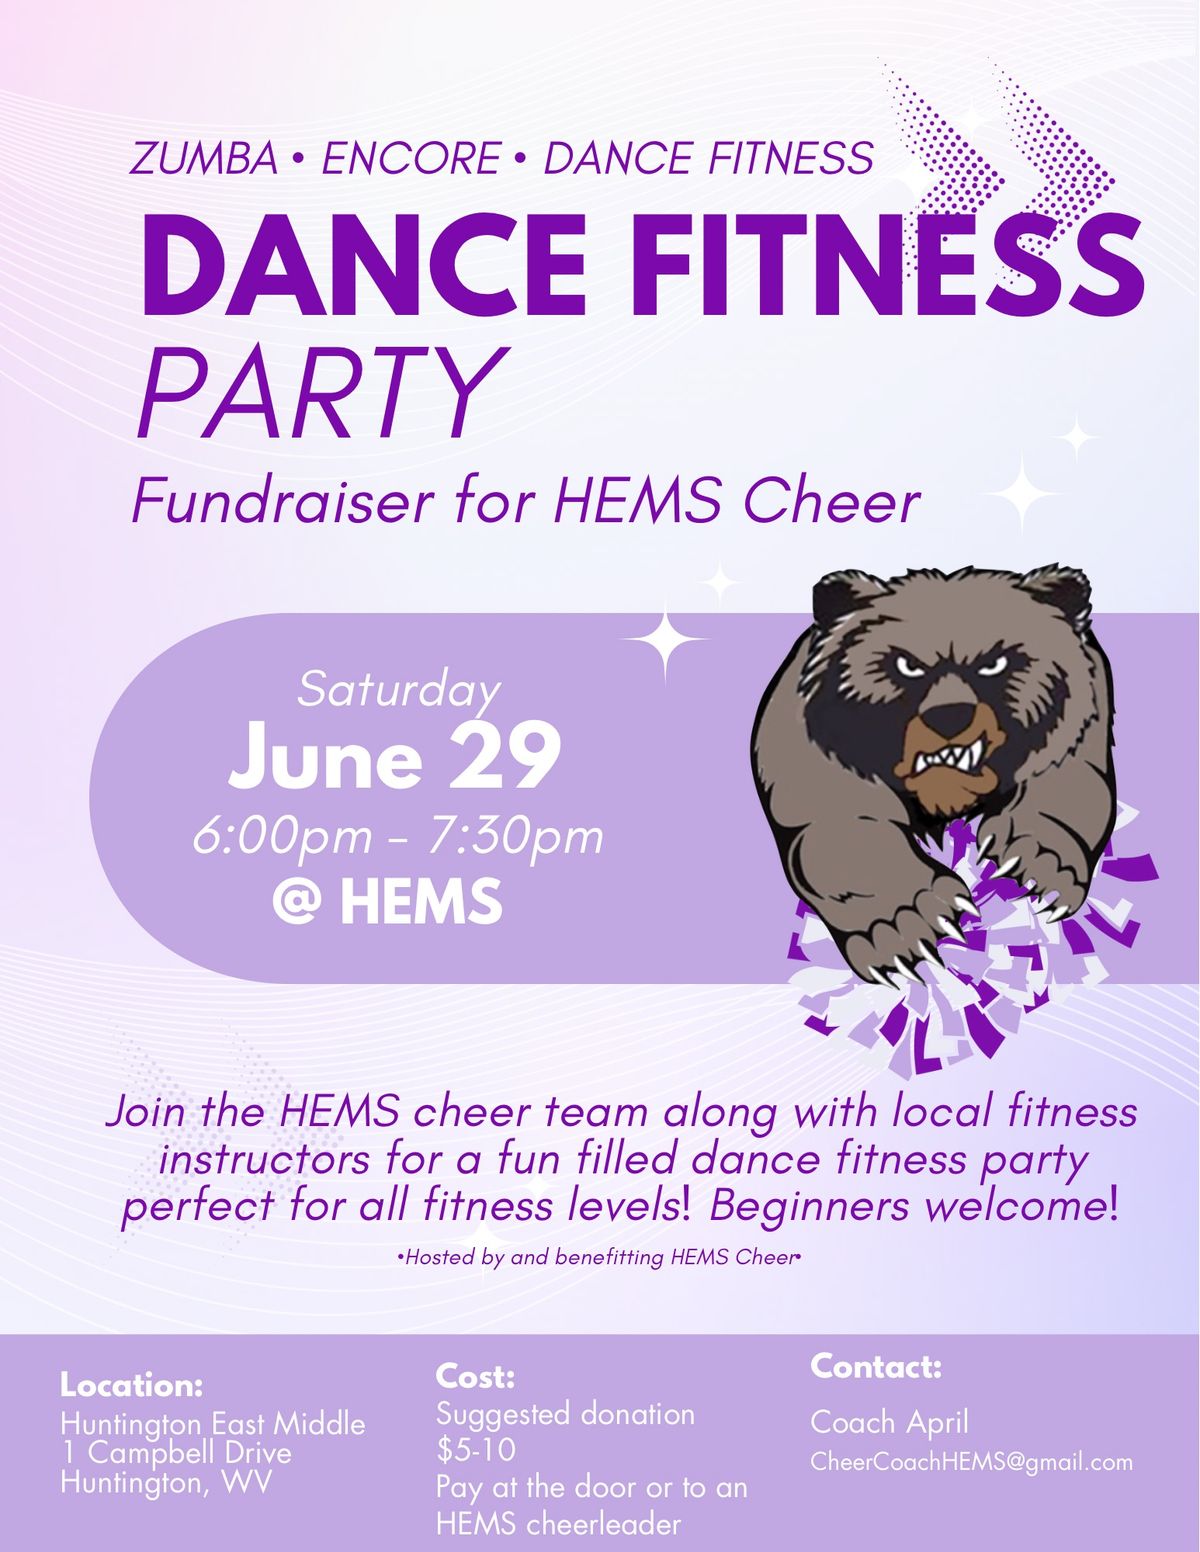 Dance Fitness Party-Fundraiser